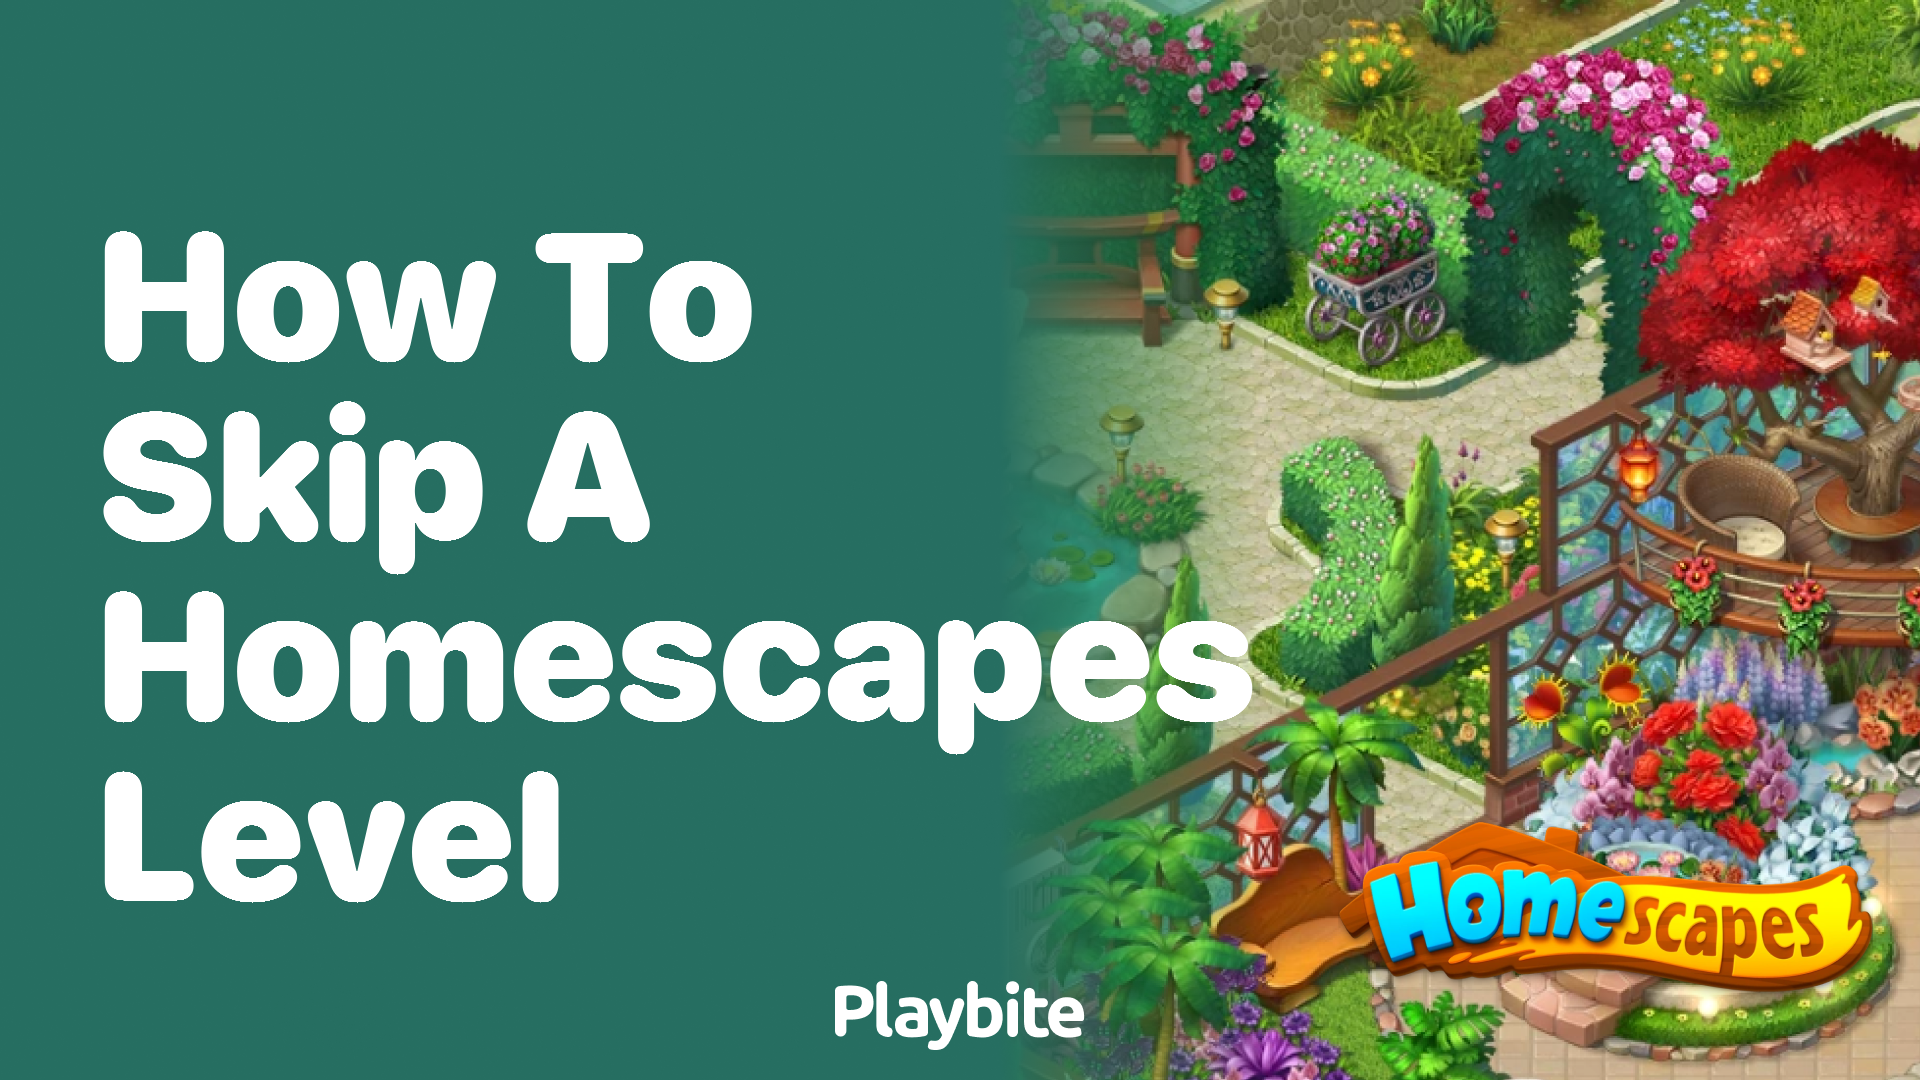 How to skip a Homescapes level